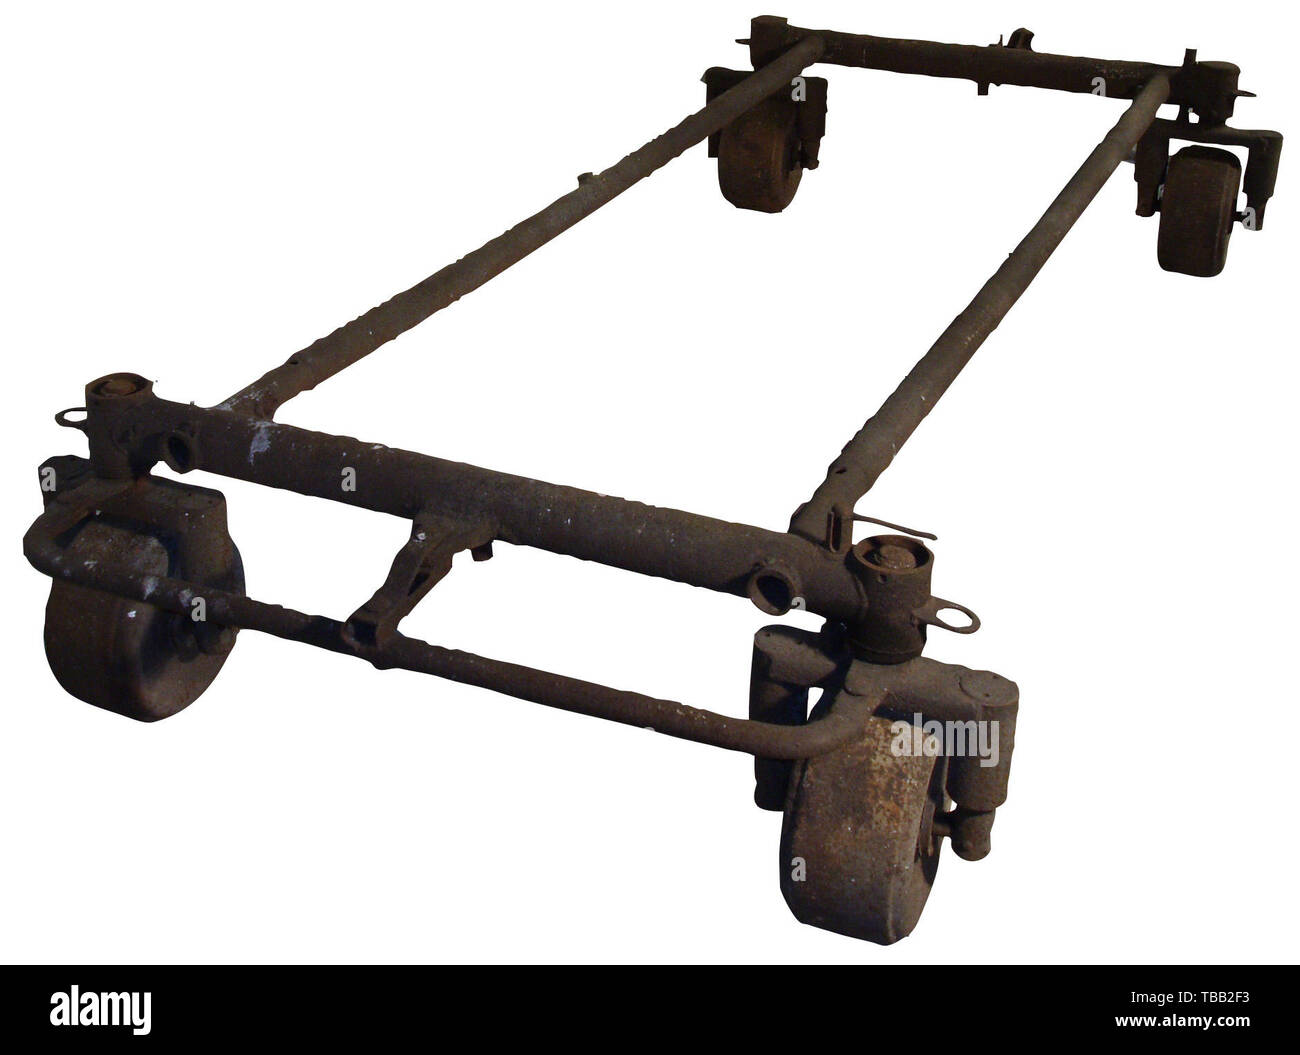 A transport dolly 76A for the V1 Reichenberg Large, rectangular welded tubular steel rack (corroded), the corners with four fork-mounted, pivotable steel wheels. Drawbar attachment present, drawbar and missile support missing. Traces of age. Dimensions ca. 315 x 145 x 52 cm. Most of the 54 Reichenberg assemblies were manufactured in 1944/45 in Neu Tramm near Dannenberg on the Elbe, and were appropriated by the U.S. Army on 23 April 1945 (cf. Jochen Tarrach, Ein Hauch von 'Tausend Jahren', Lüchow 1988). The transport racks were partly left behind. Offered here is a very rare, Editorial-Use-Only Stock Photo